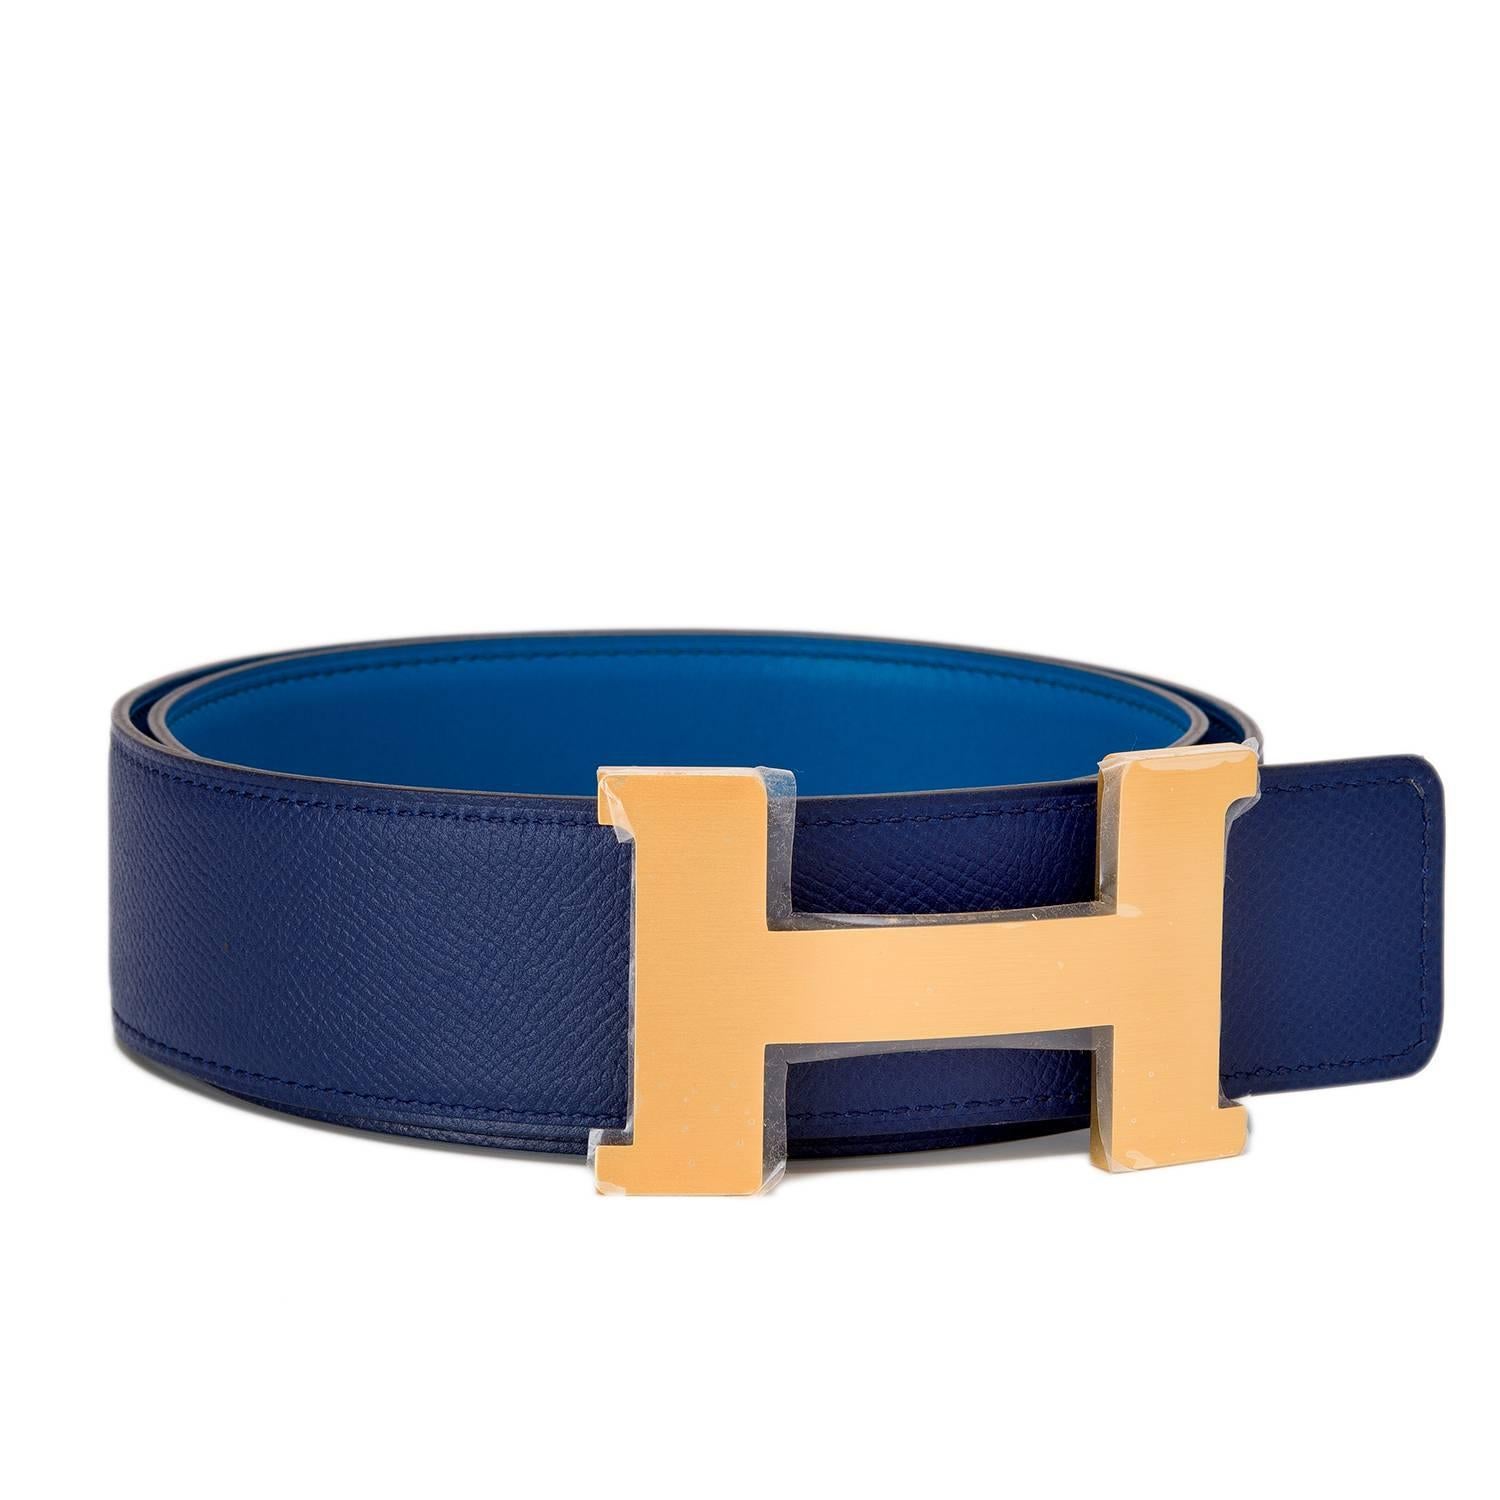  	
Hermes belt kit comprising an adjustable wide 42mm Constance H belt of blue izmir swift leather with tonal stitching reversing to blue sapphire epsom leather with tonal stitching accompanied by a removable brushed gold H buckle.

Origin: